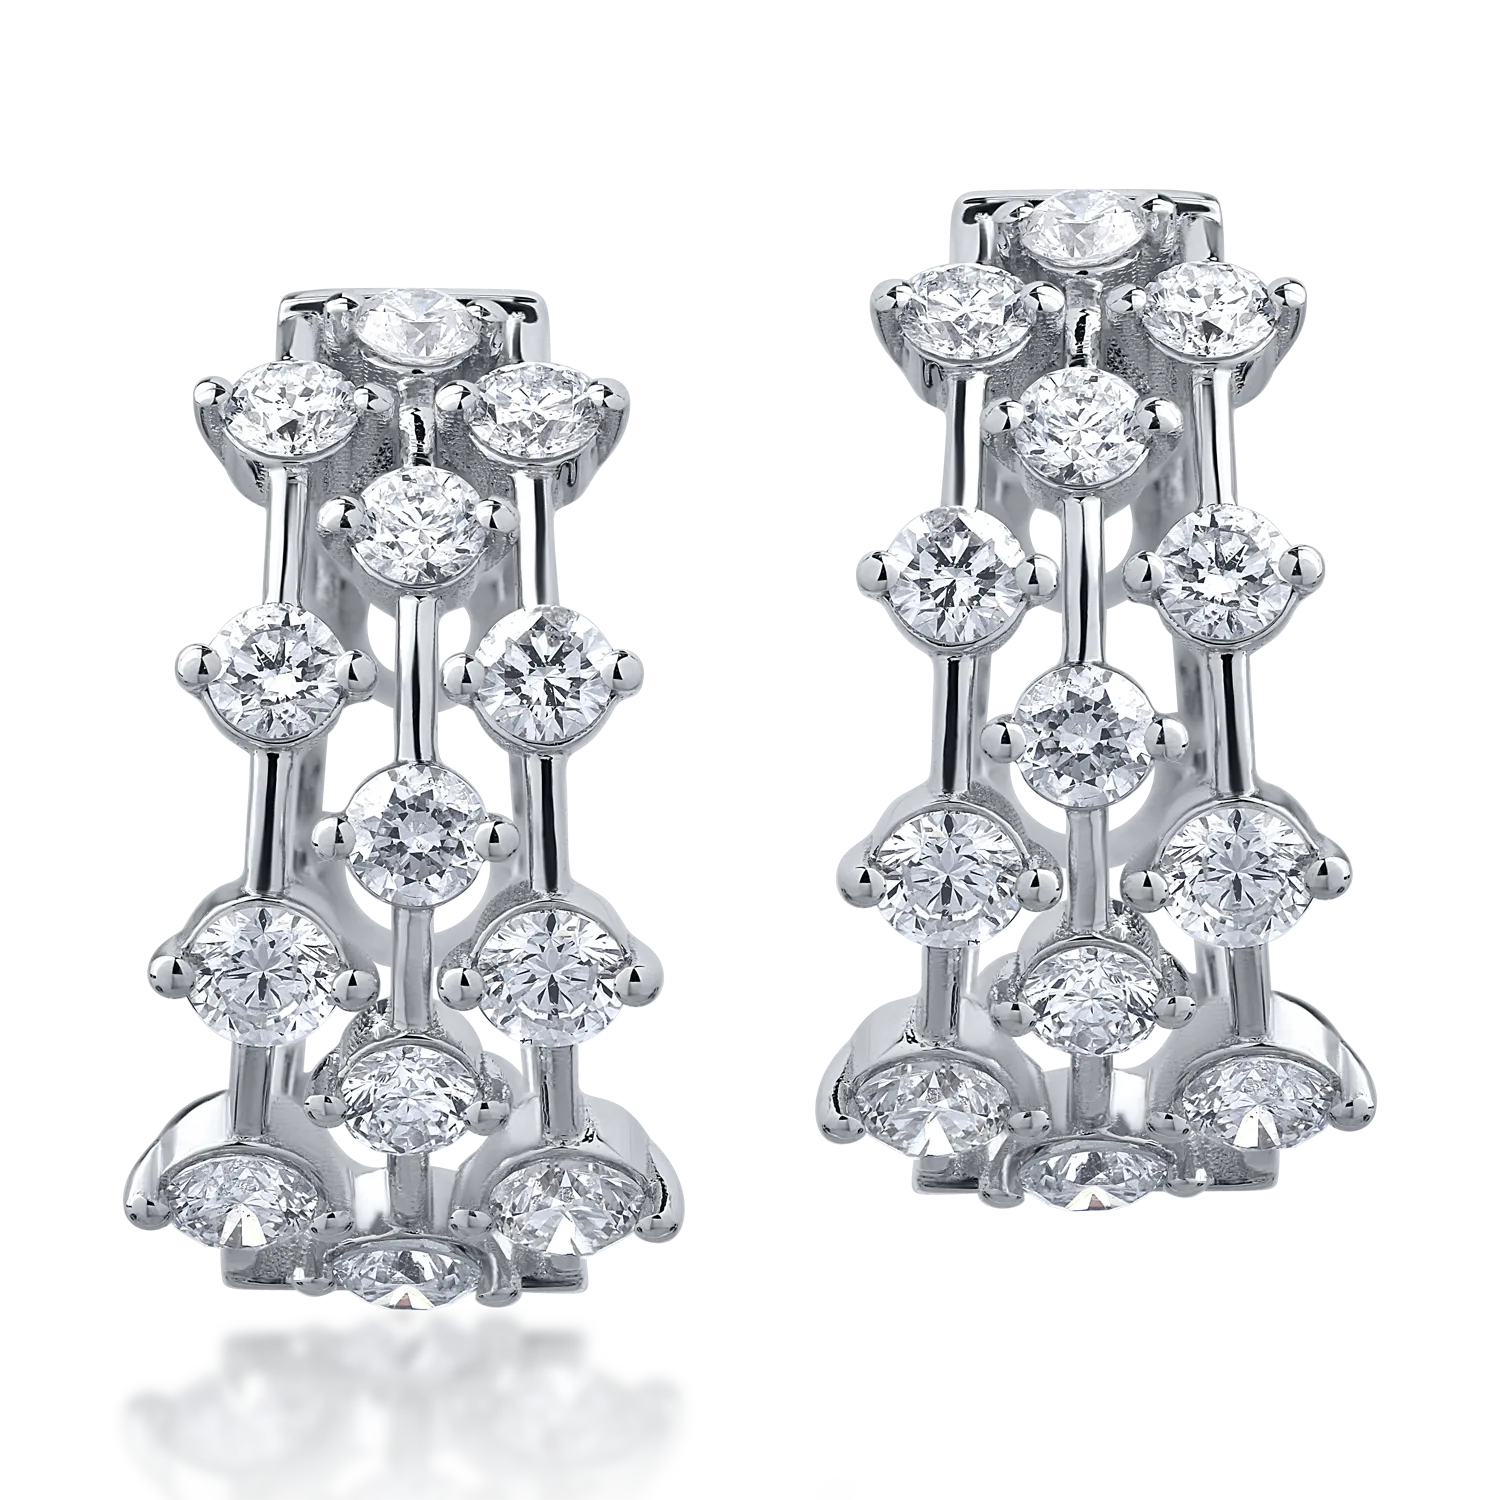 18K white gold earrings with 2.27ct diamonds